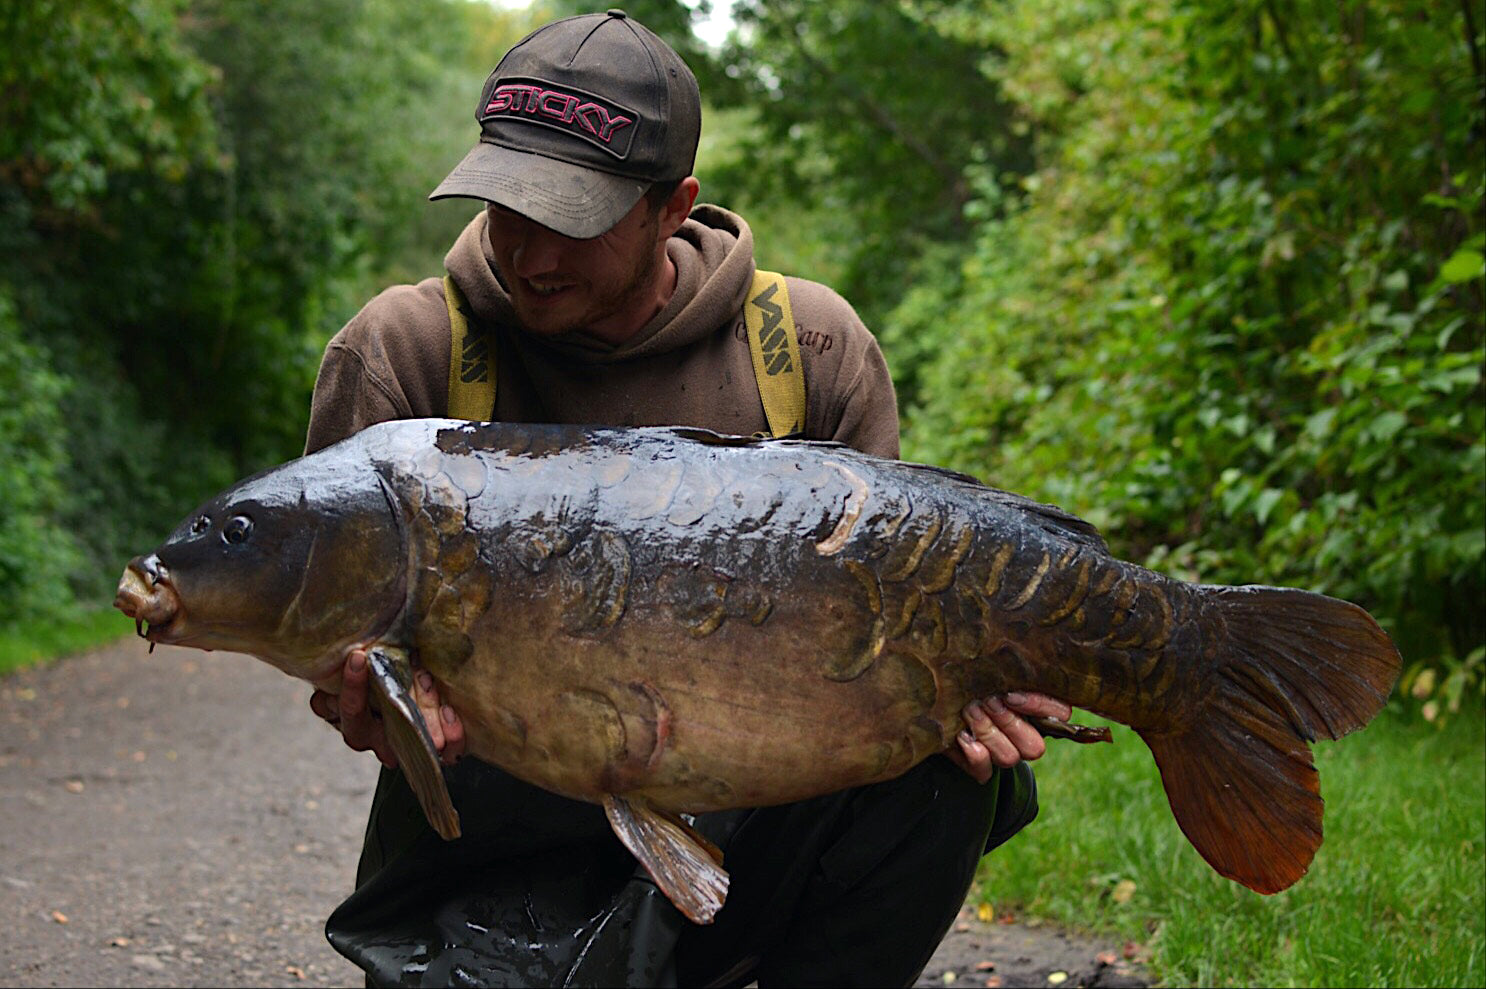 Dan Handley with a 36+ Mirror from Dinton pastures white swan - The take came after 72hours